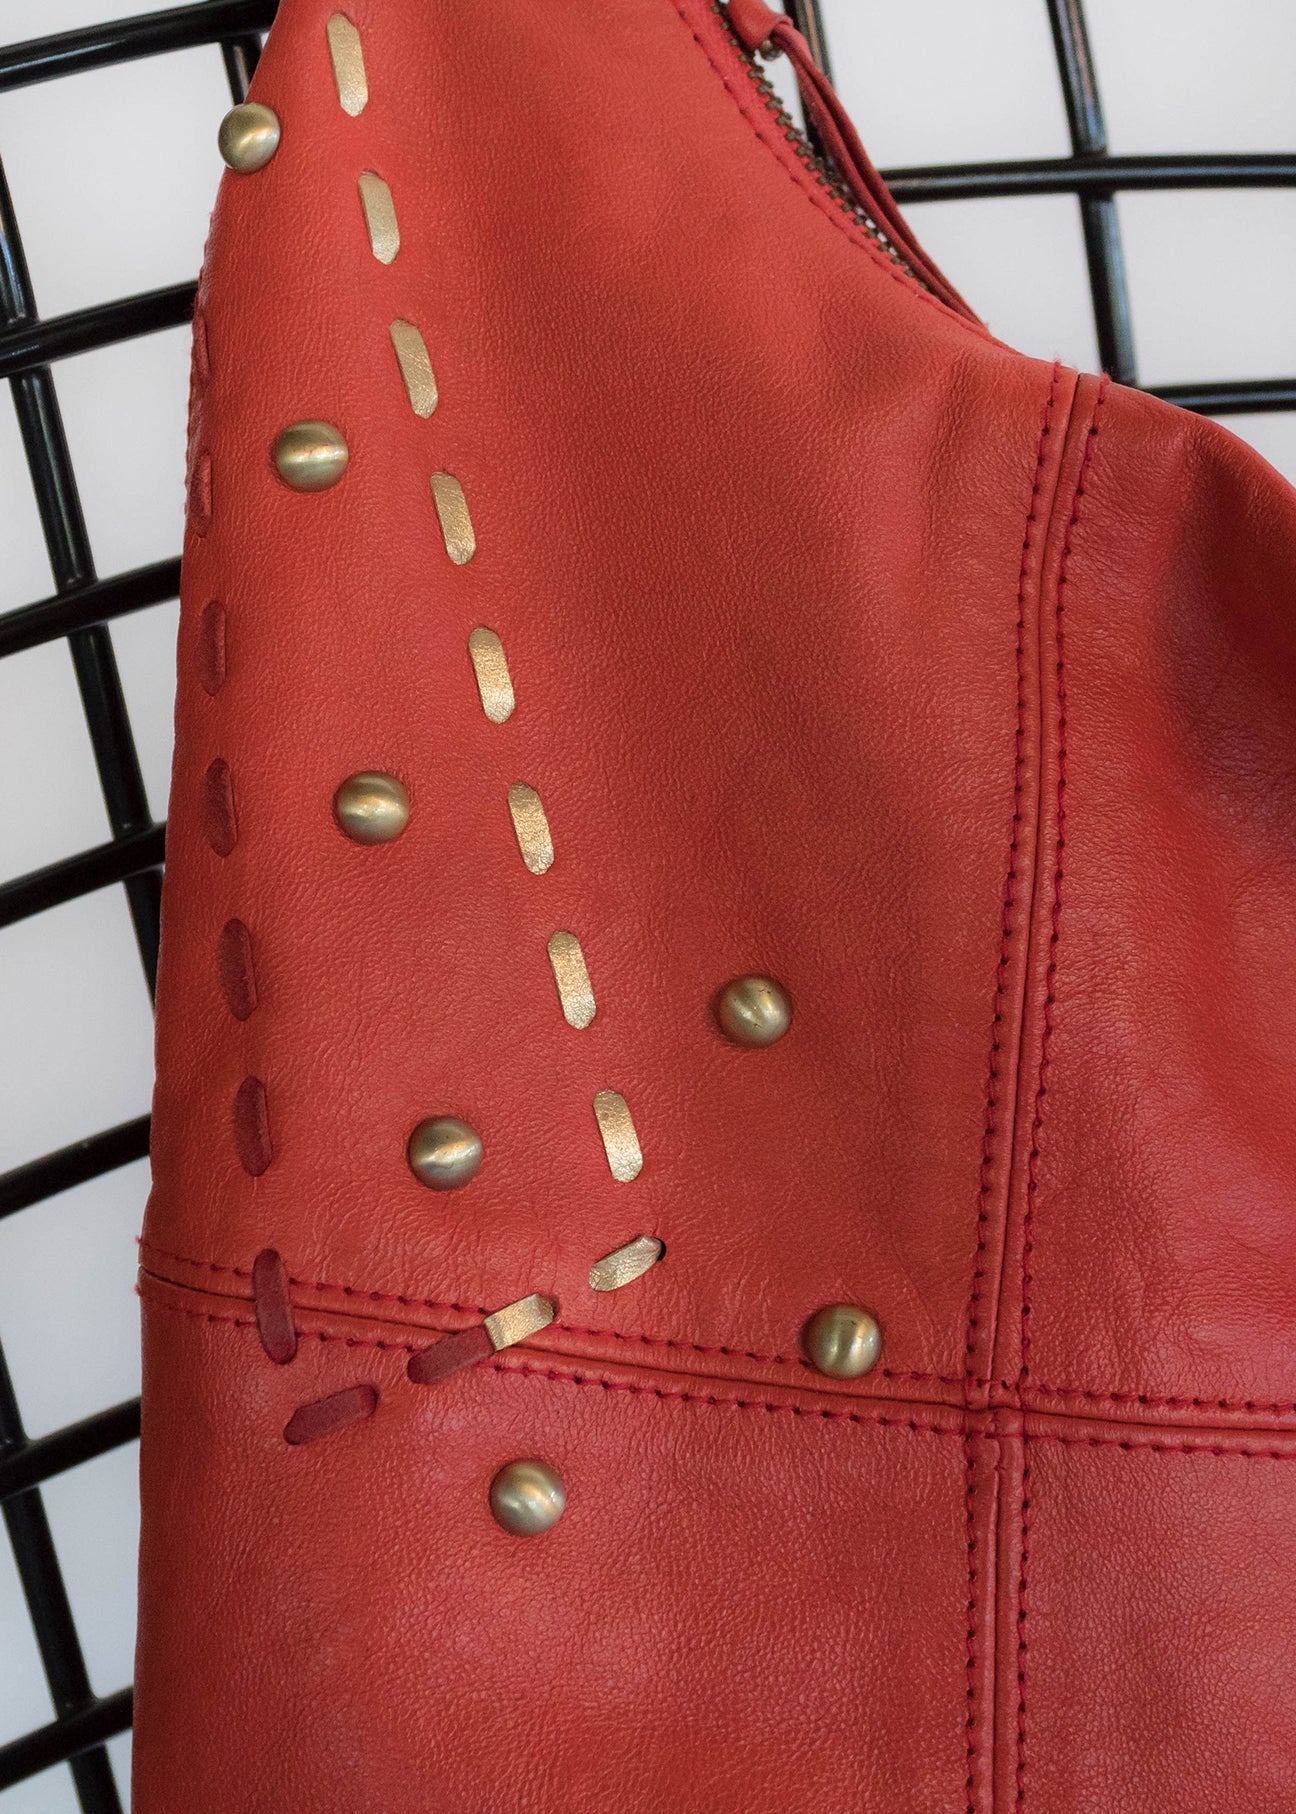 Y2K Red Leather Hobo Purse